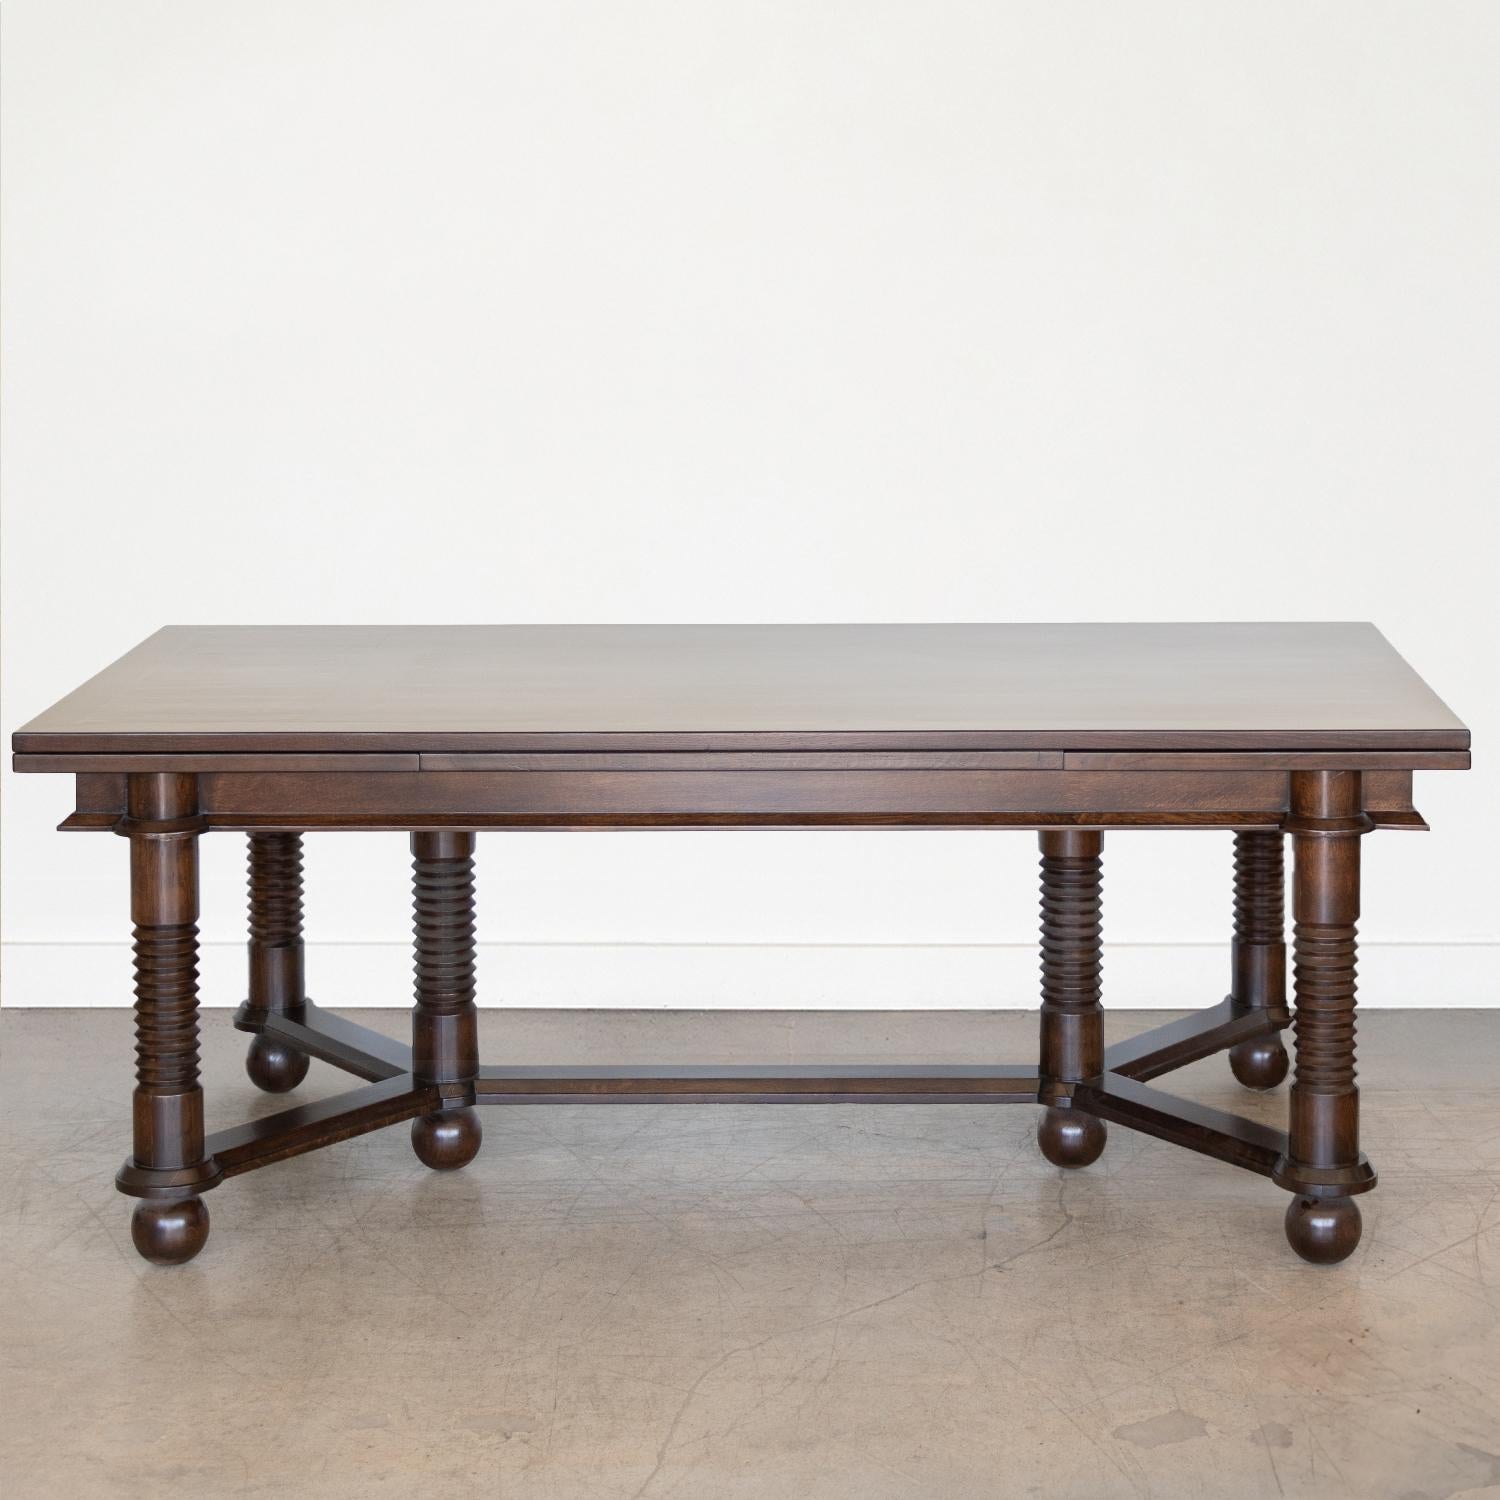 Incredible large wood dining table by Charles Dudouyt from France, 1940s. Rectangular wood top and 7 leg base with carved legs and large ball feet. Dark stain on oak has been refinished and shows beautiful grain. Stunning statement piece, perfect as